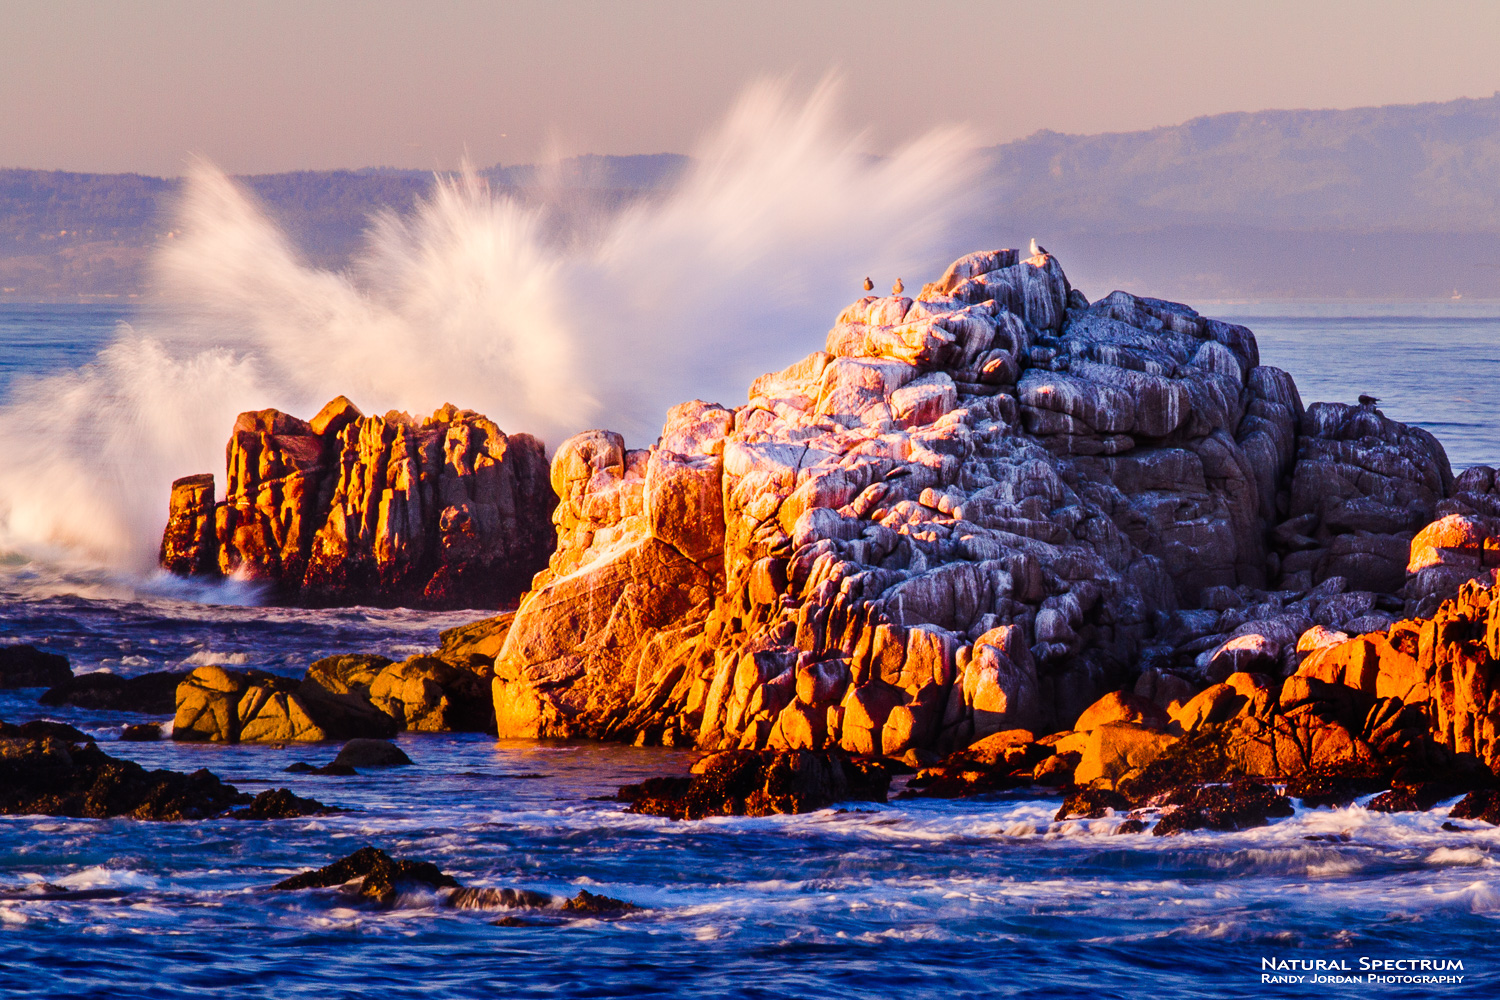 A bit of patience, late afternoon sun and a cooperative wave, Spanish Bay, Monterey, California.